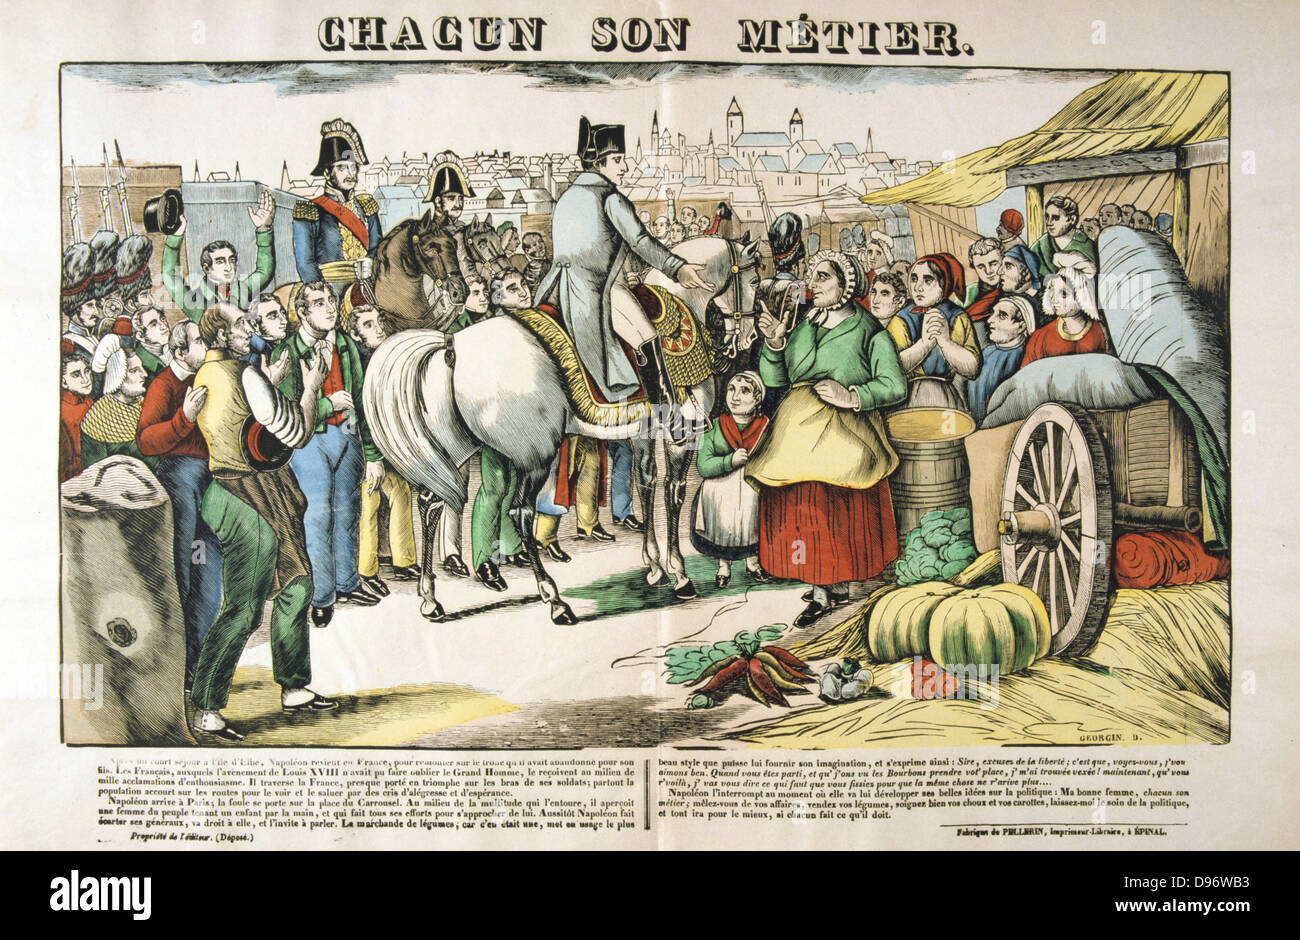 Napoleon I (Napoleon Bonaparte 1769-1821) returning to France from exile in Elba, 26 February 1815, welcomed by his supporters. Nineteenth century popular French coloured woodcut. Stock Photo